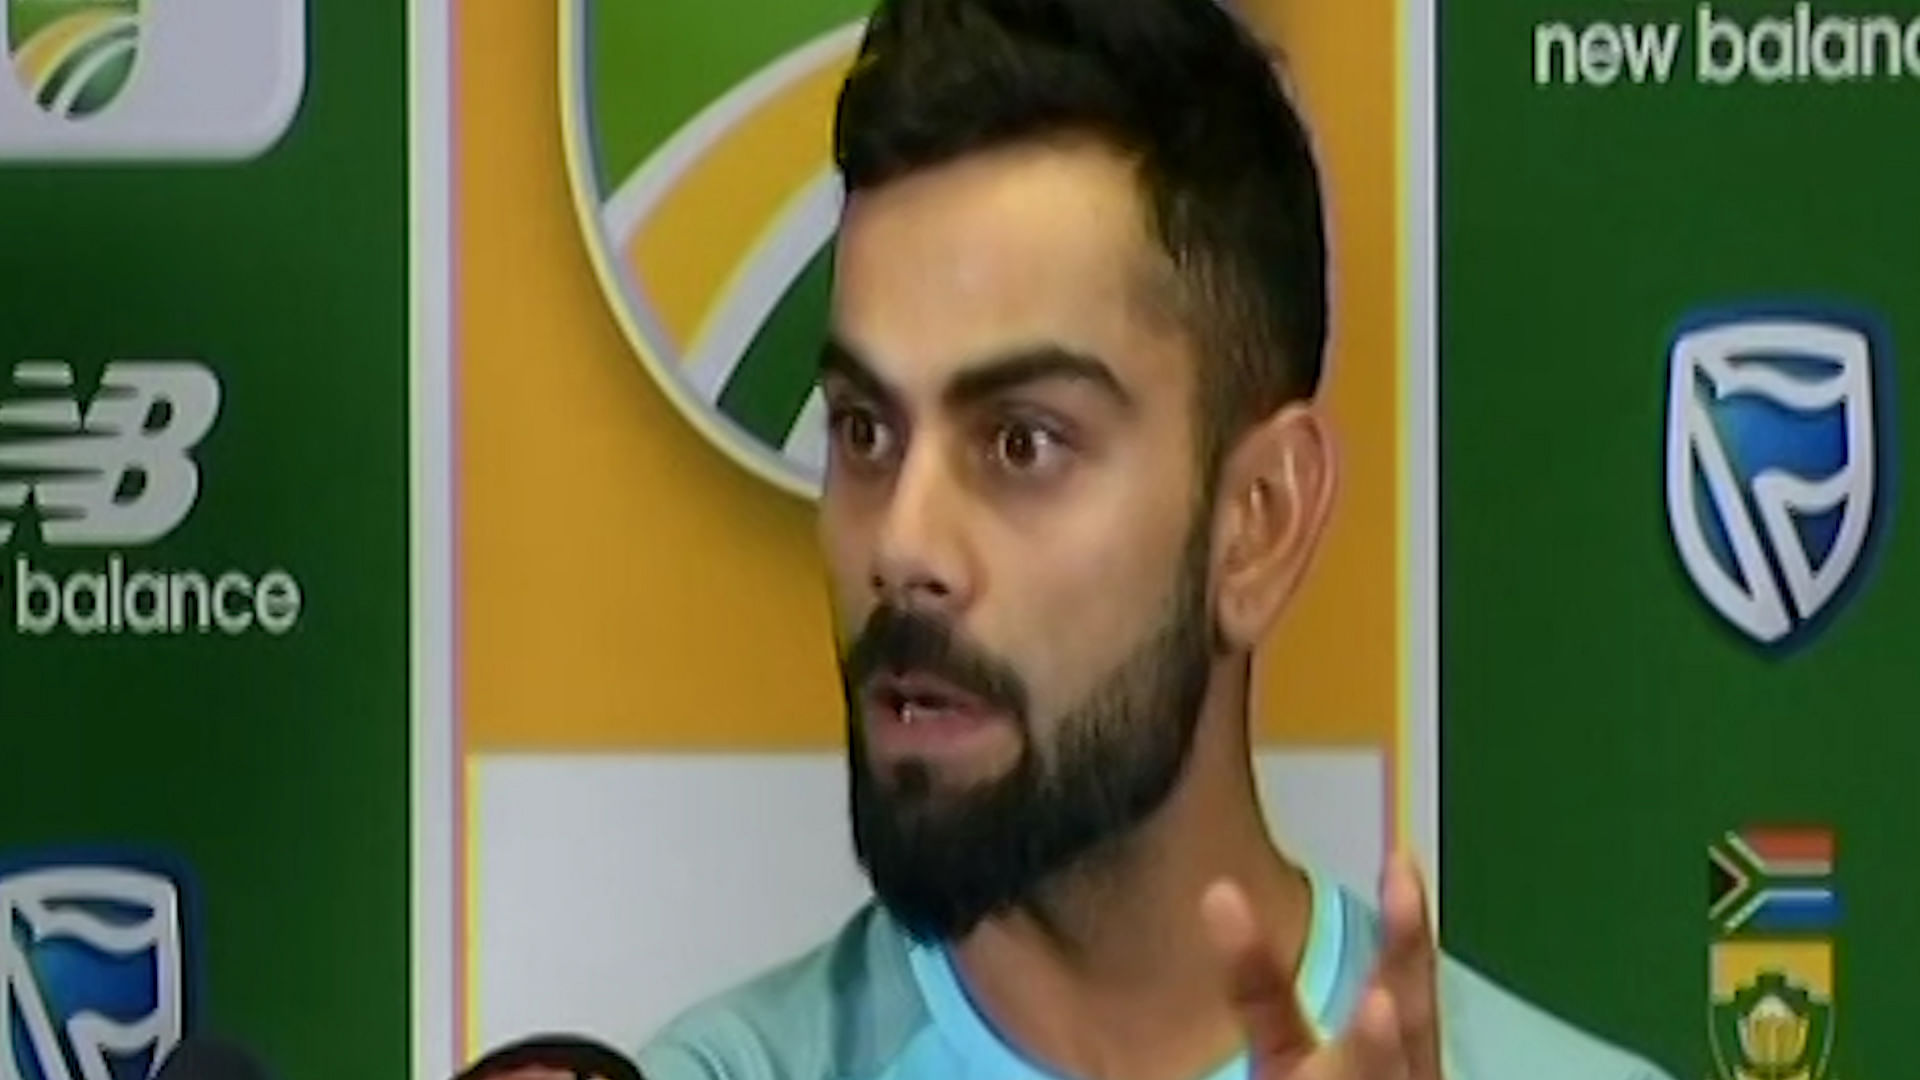 Virat Kohli speaks to the media after India defeated South Africa 5-1 in the ODI series.